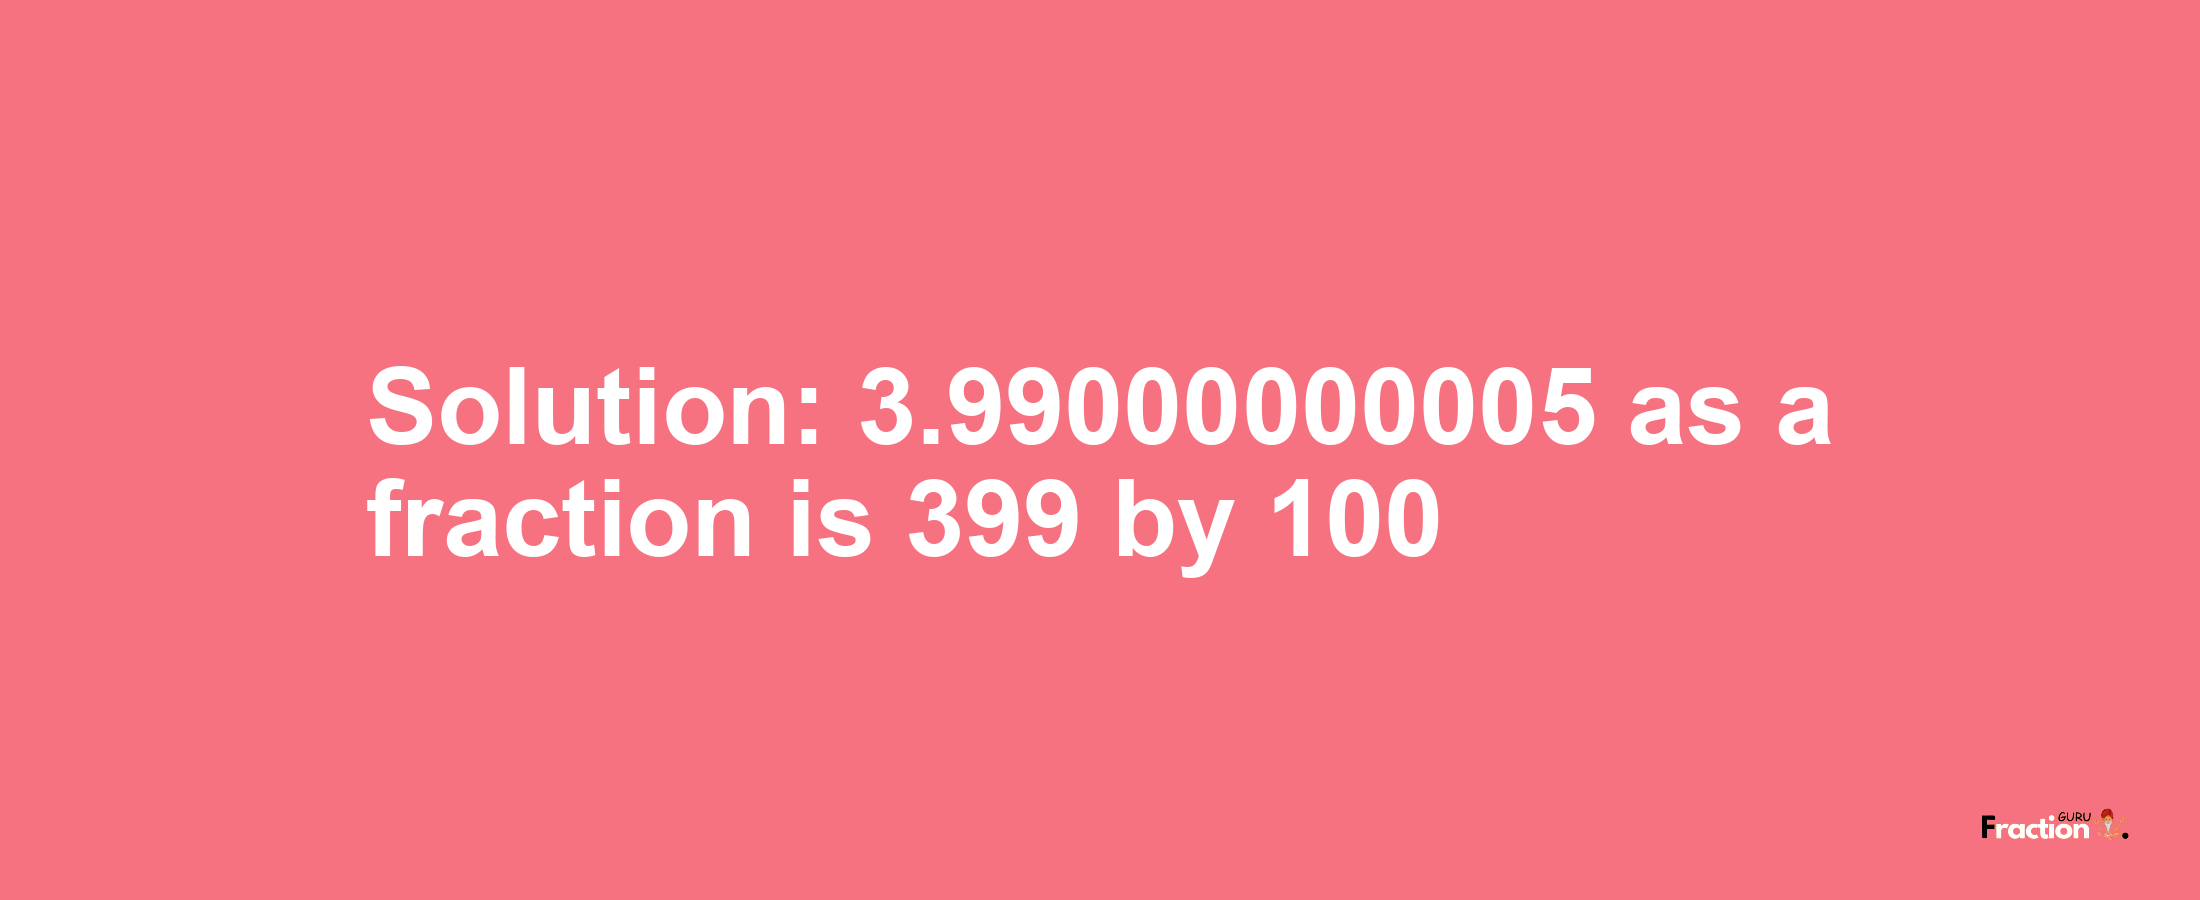 Solution:3.99000000005 as a fraction is 399/100